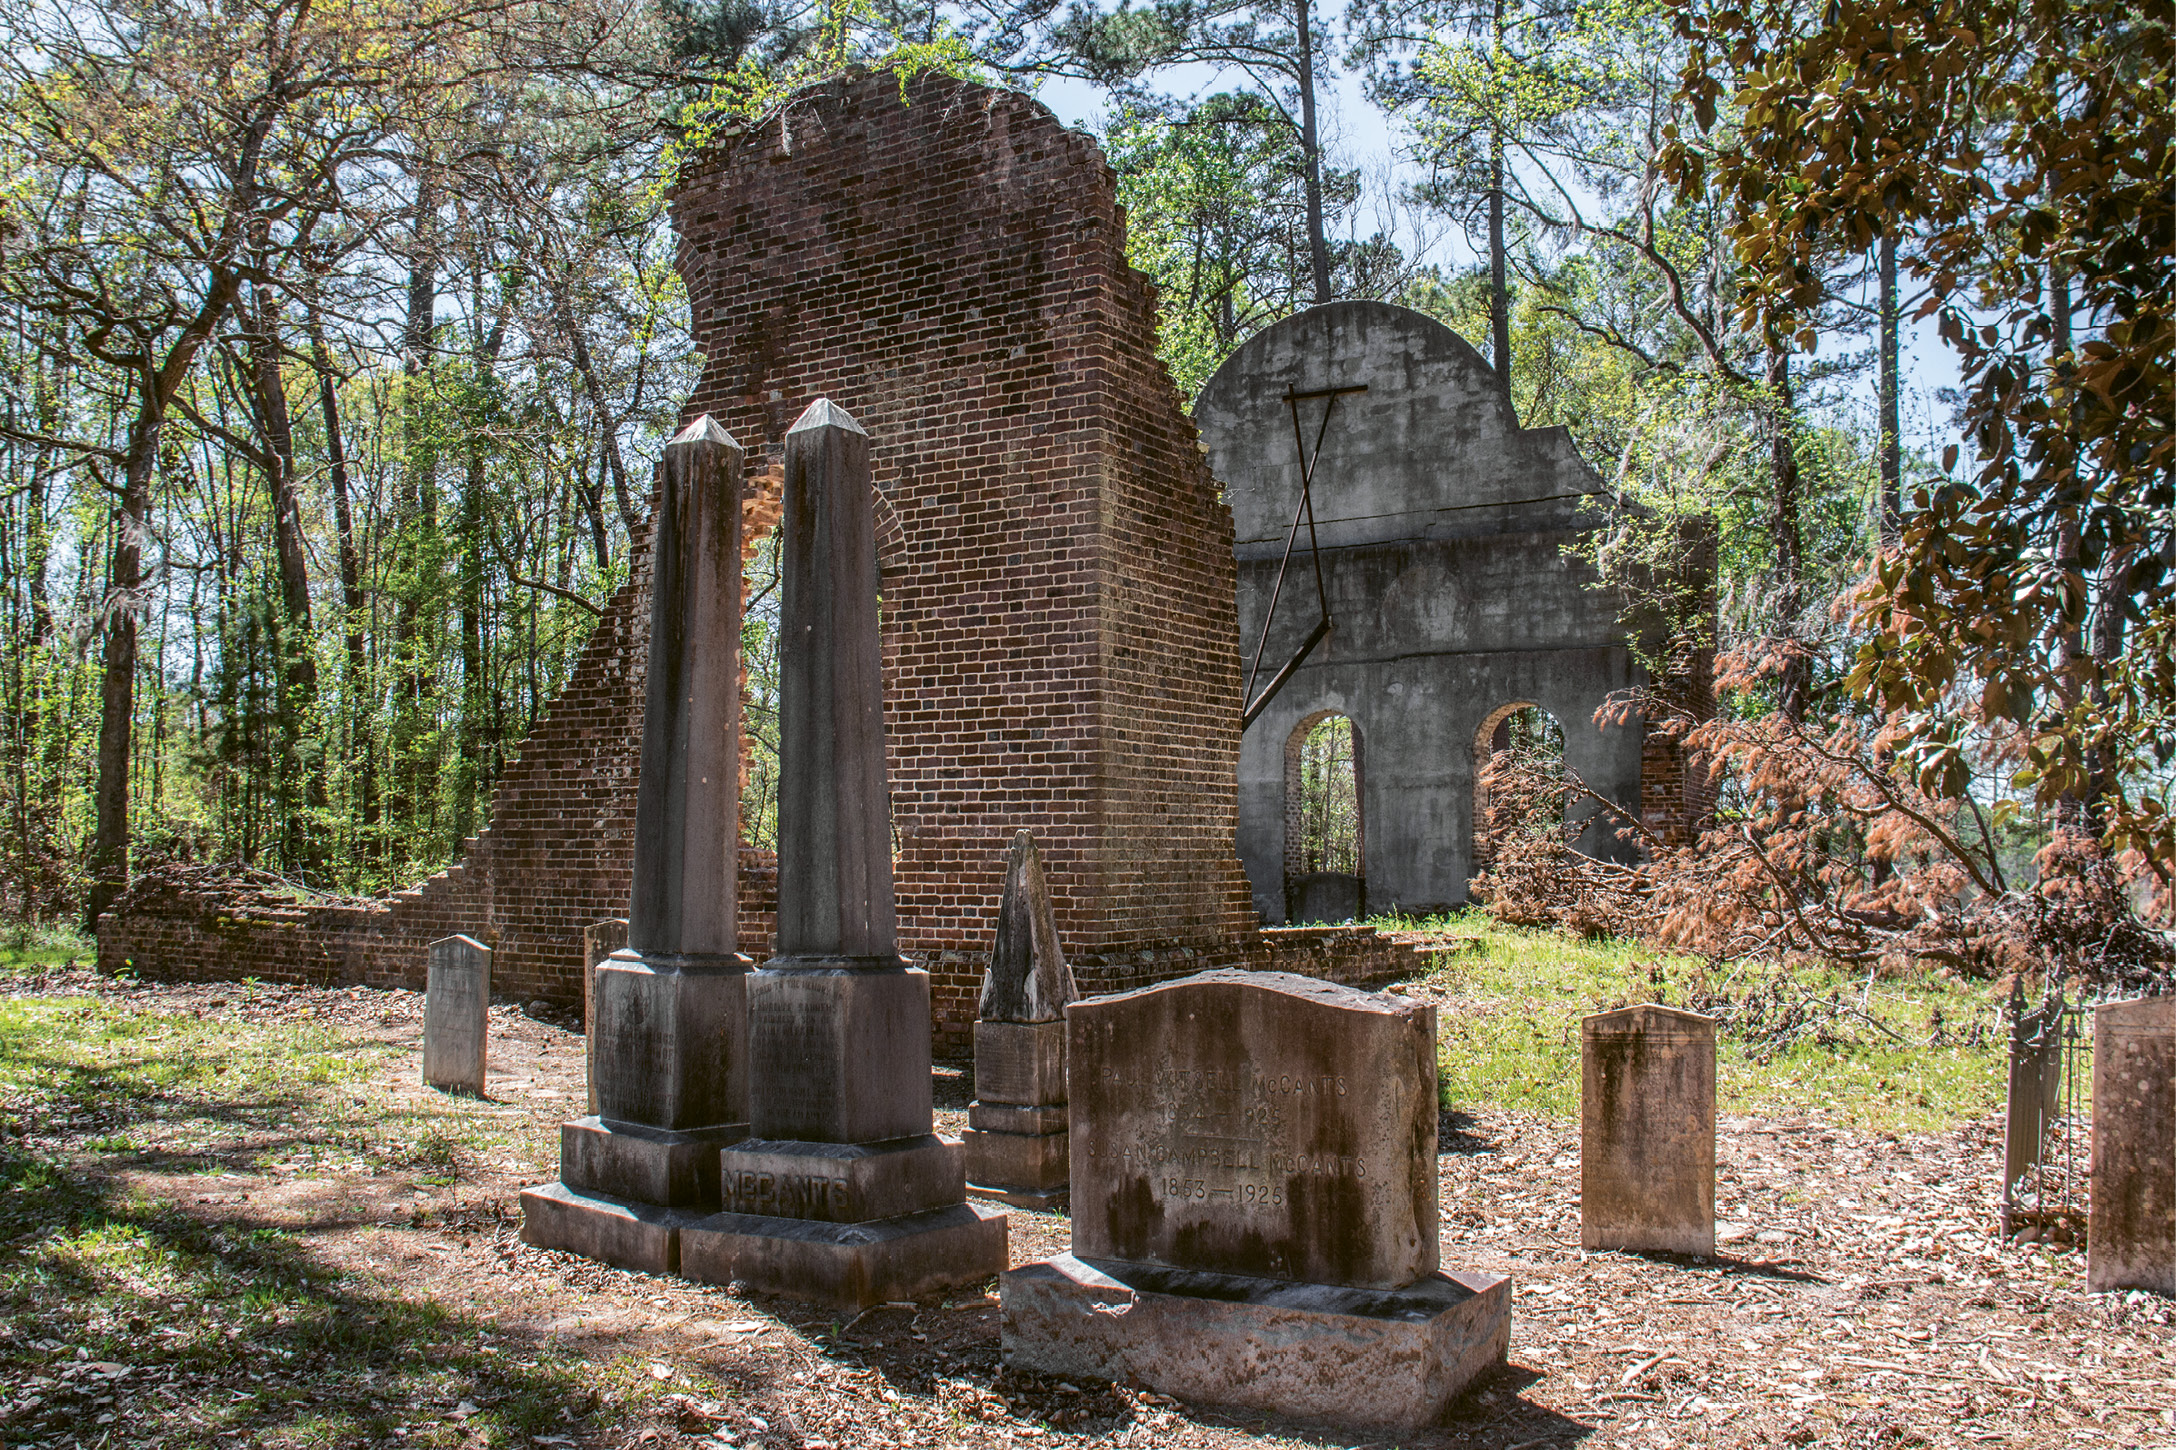 Pon Pon Chapel-of-Ease: Crumbling walls, part of a cistern, and a churchyard are all that remain of this chapel off Parkers Ferry Road, formerly a busy stagecoach road between Charleston and Savannah.